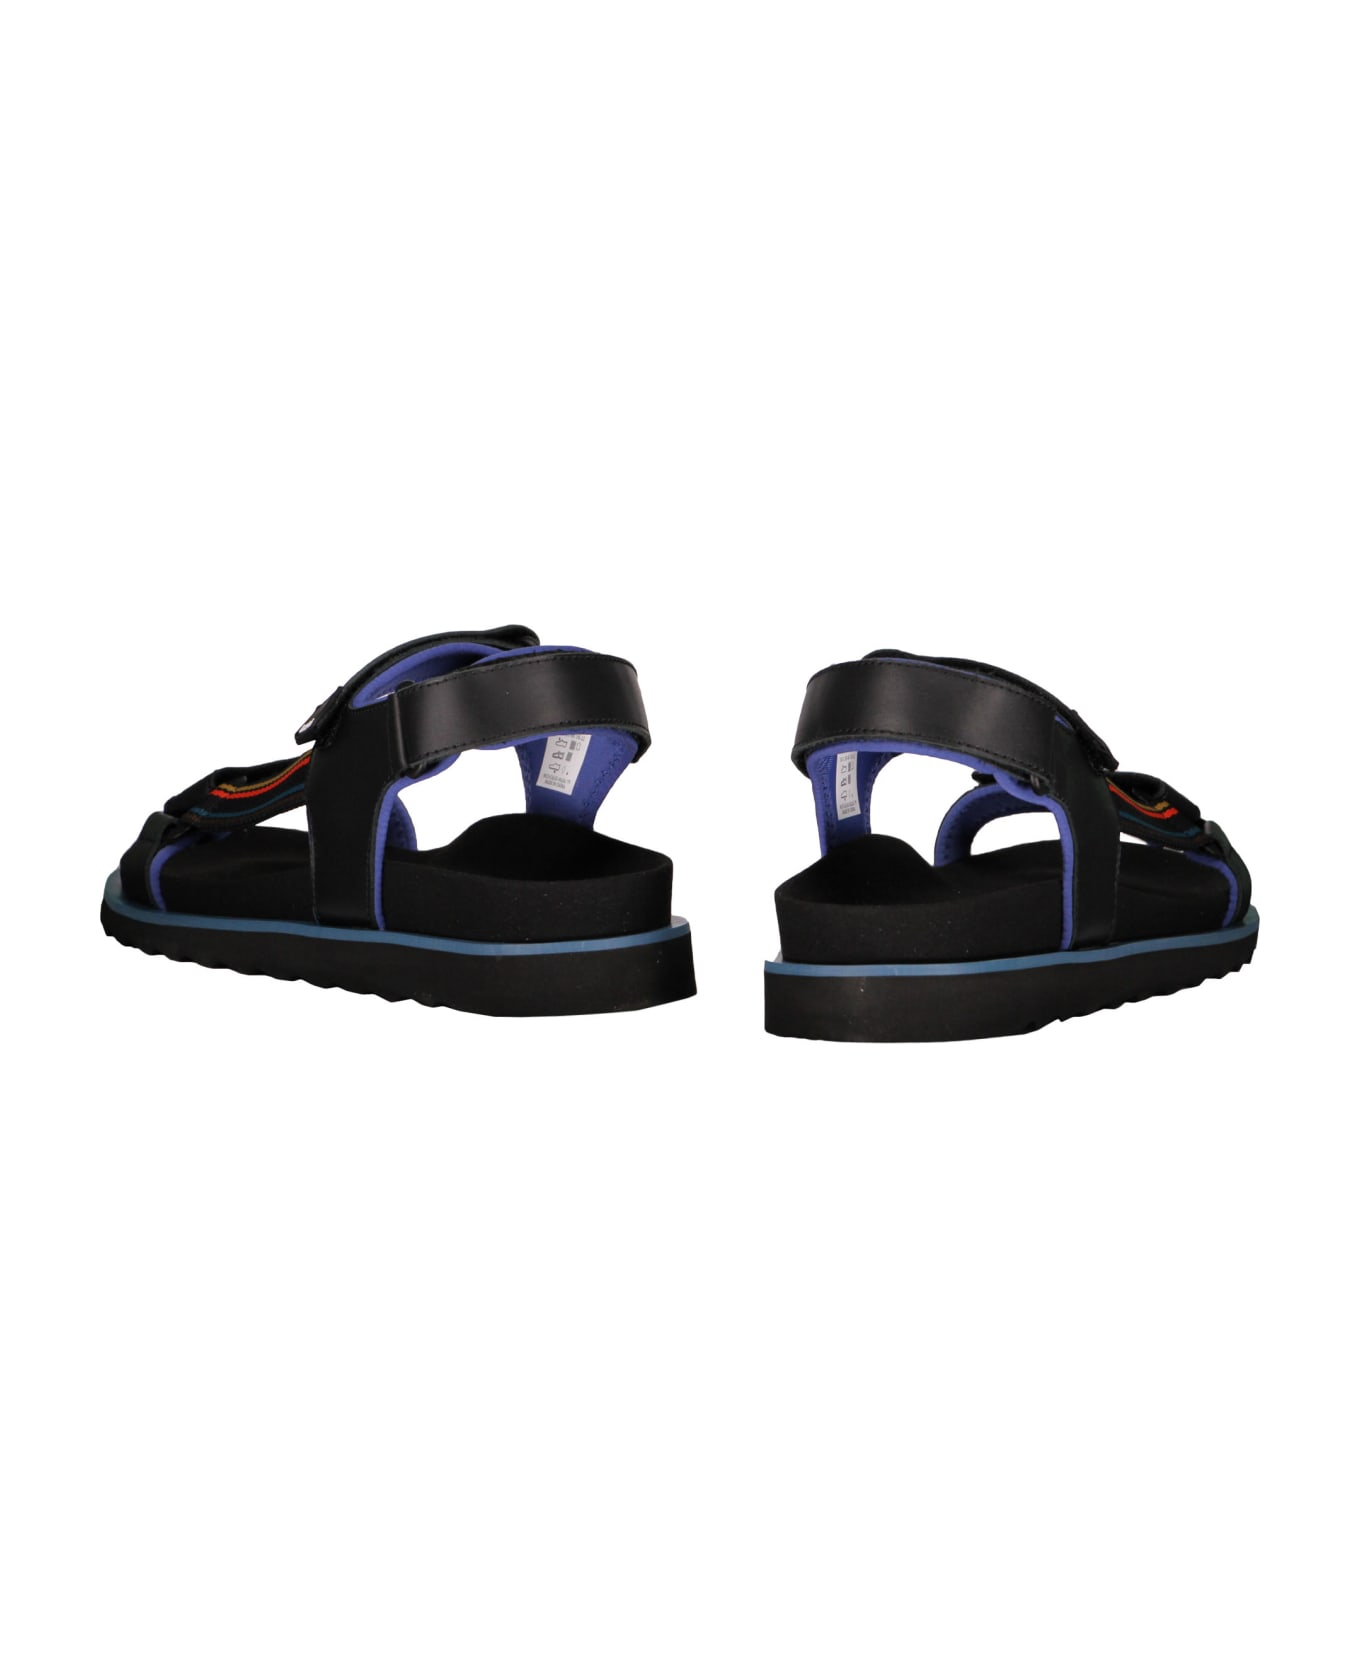 Paul Smith Flat Sandals - black その他各種シューズ